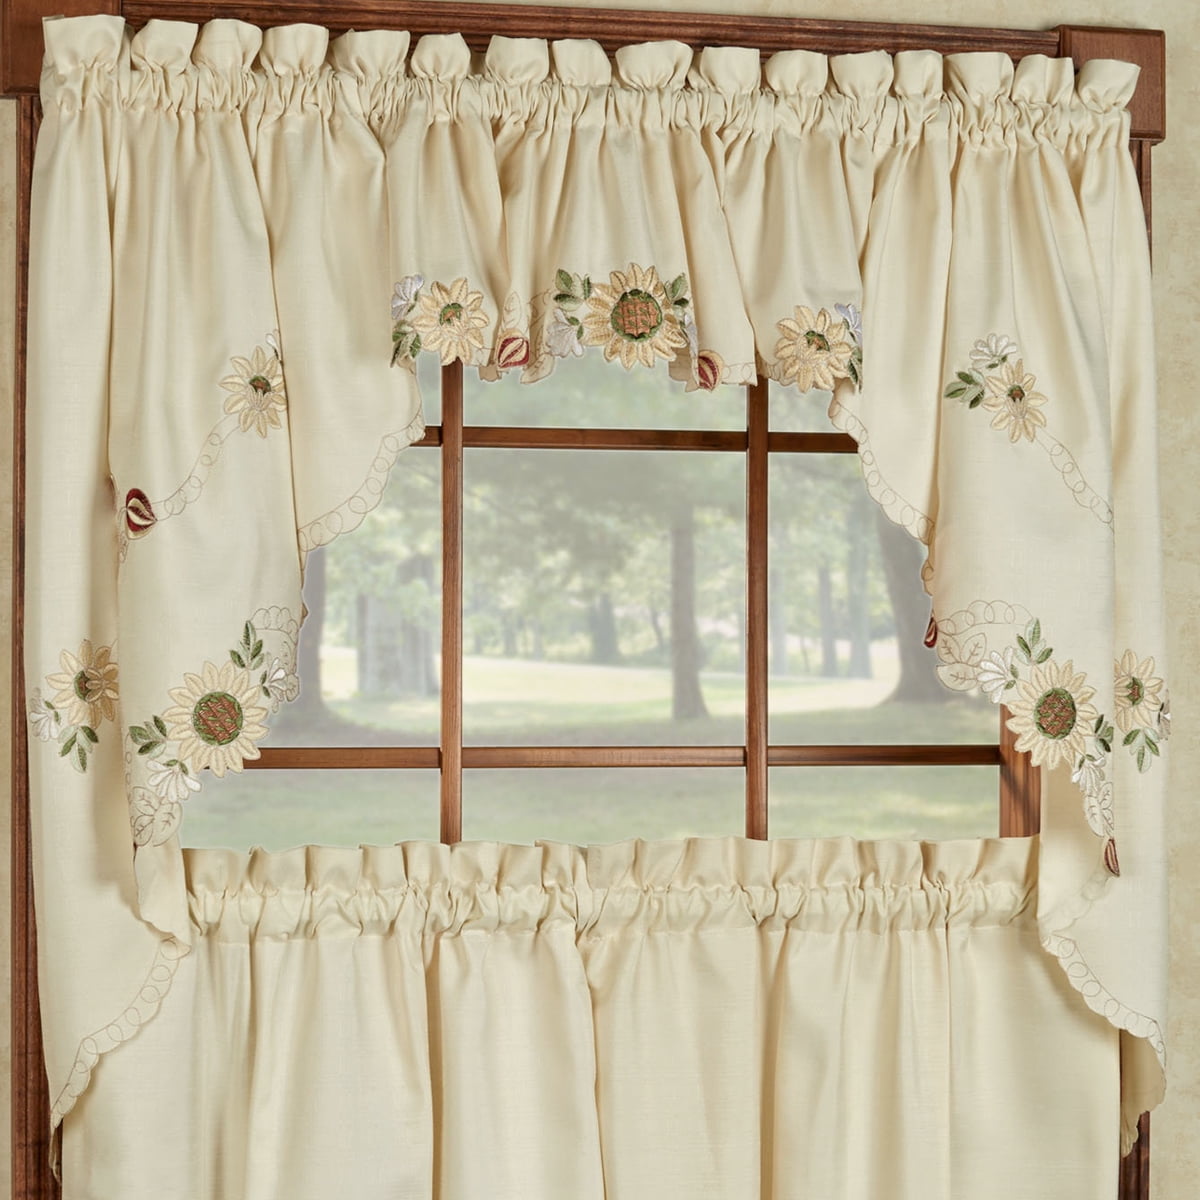 Valance or Swag Pair NEW Lorraine Home Fashions English Garden Tier Curtain 